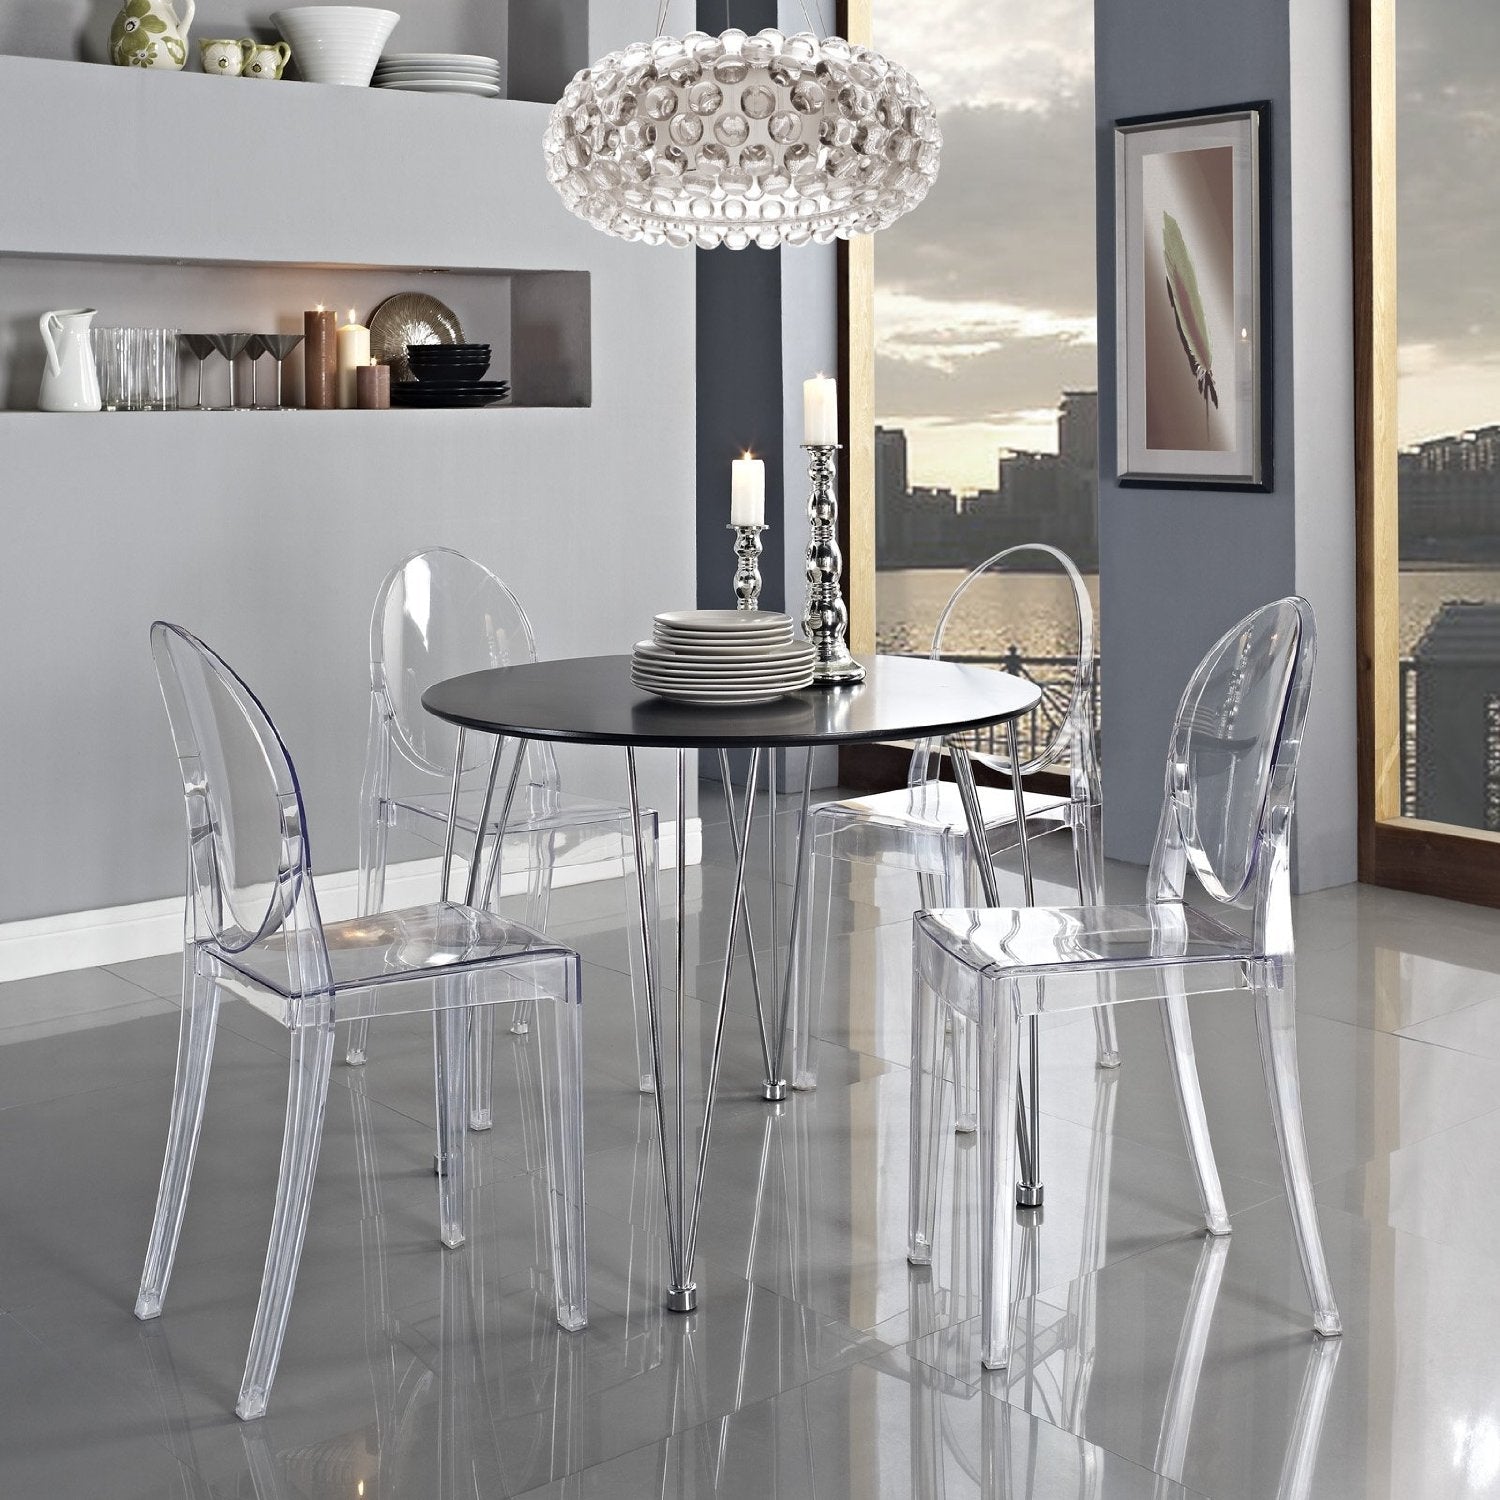 Dining > Dining Chairs - Stackable Clear Acrylic Dining Chair For Indoor Or Outdoor Use